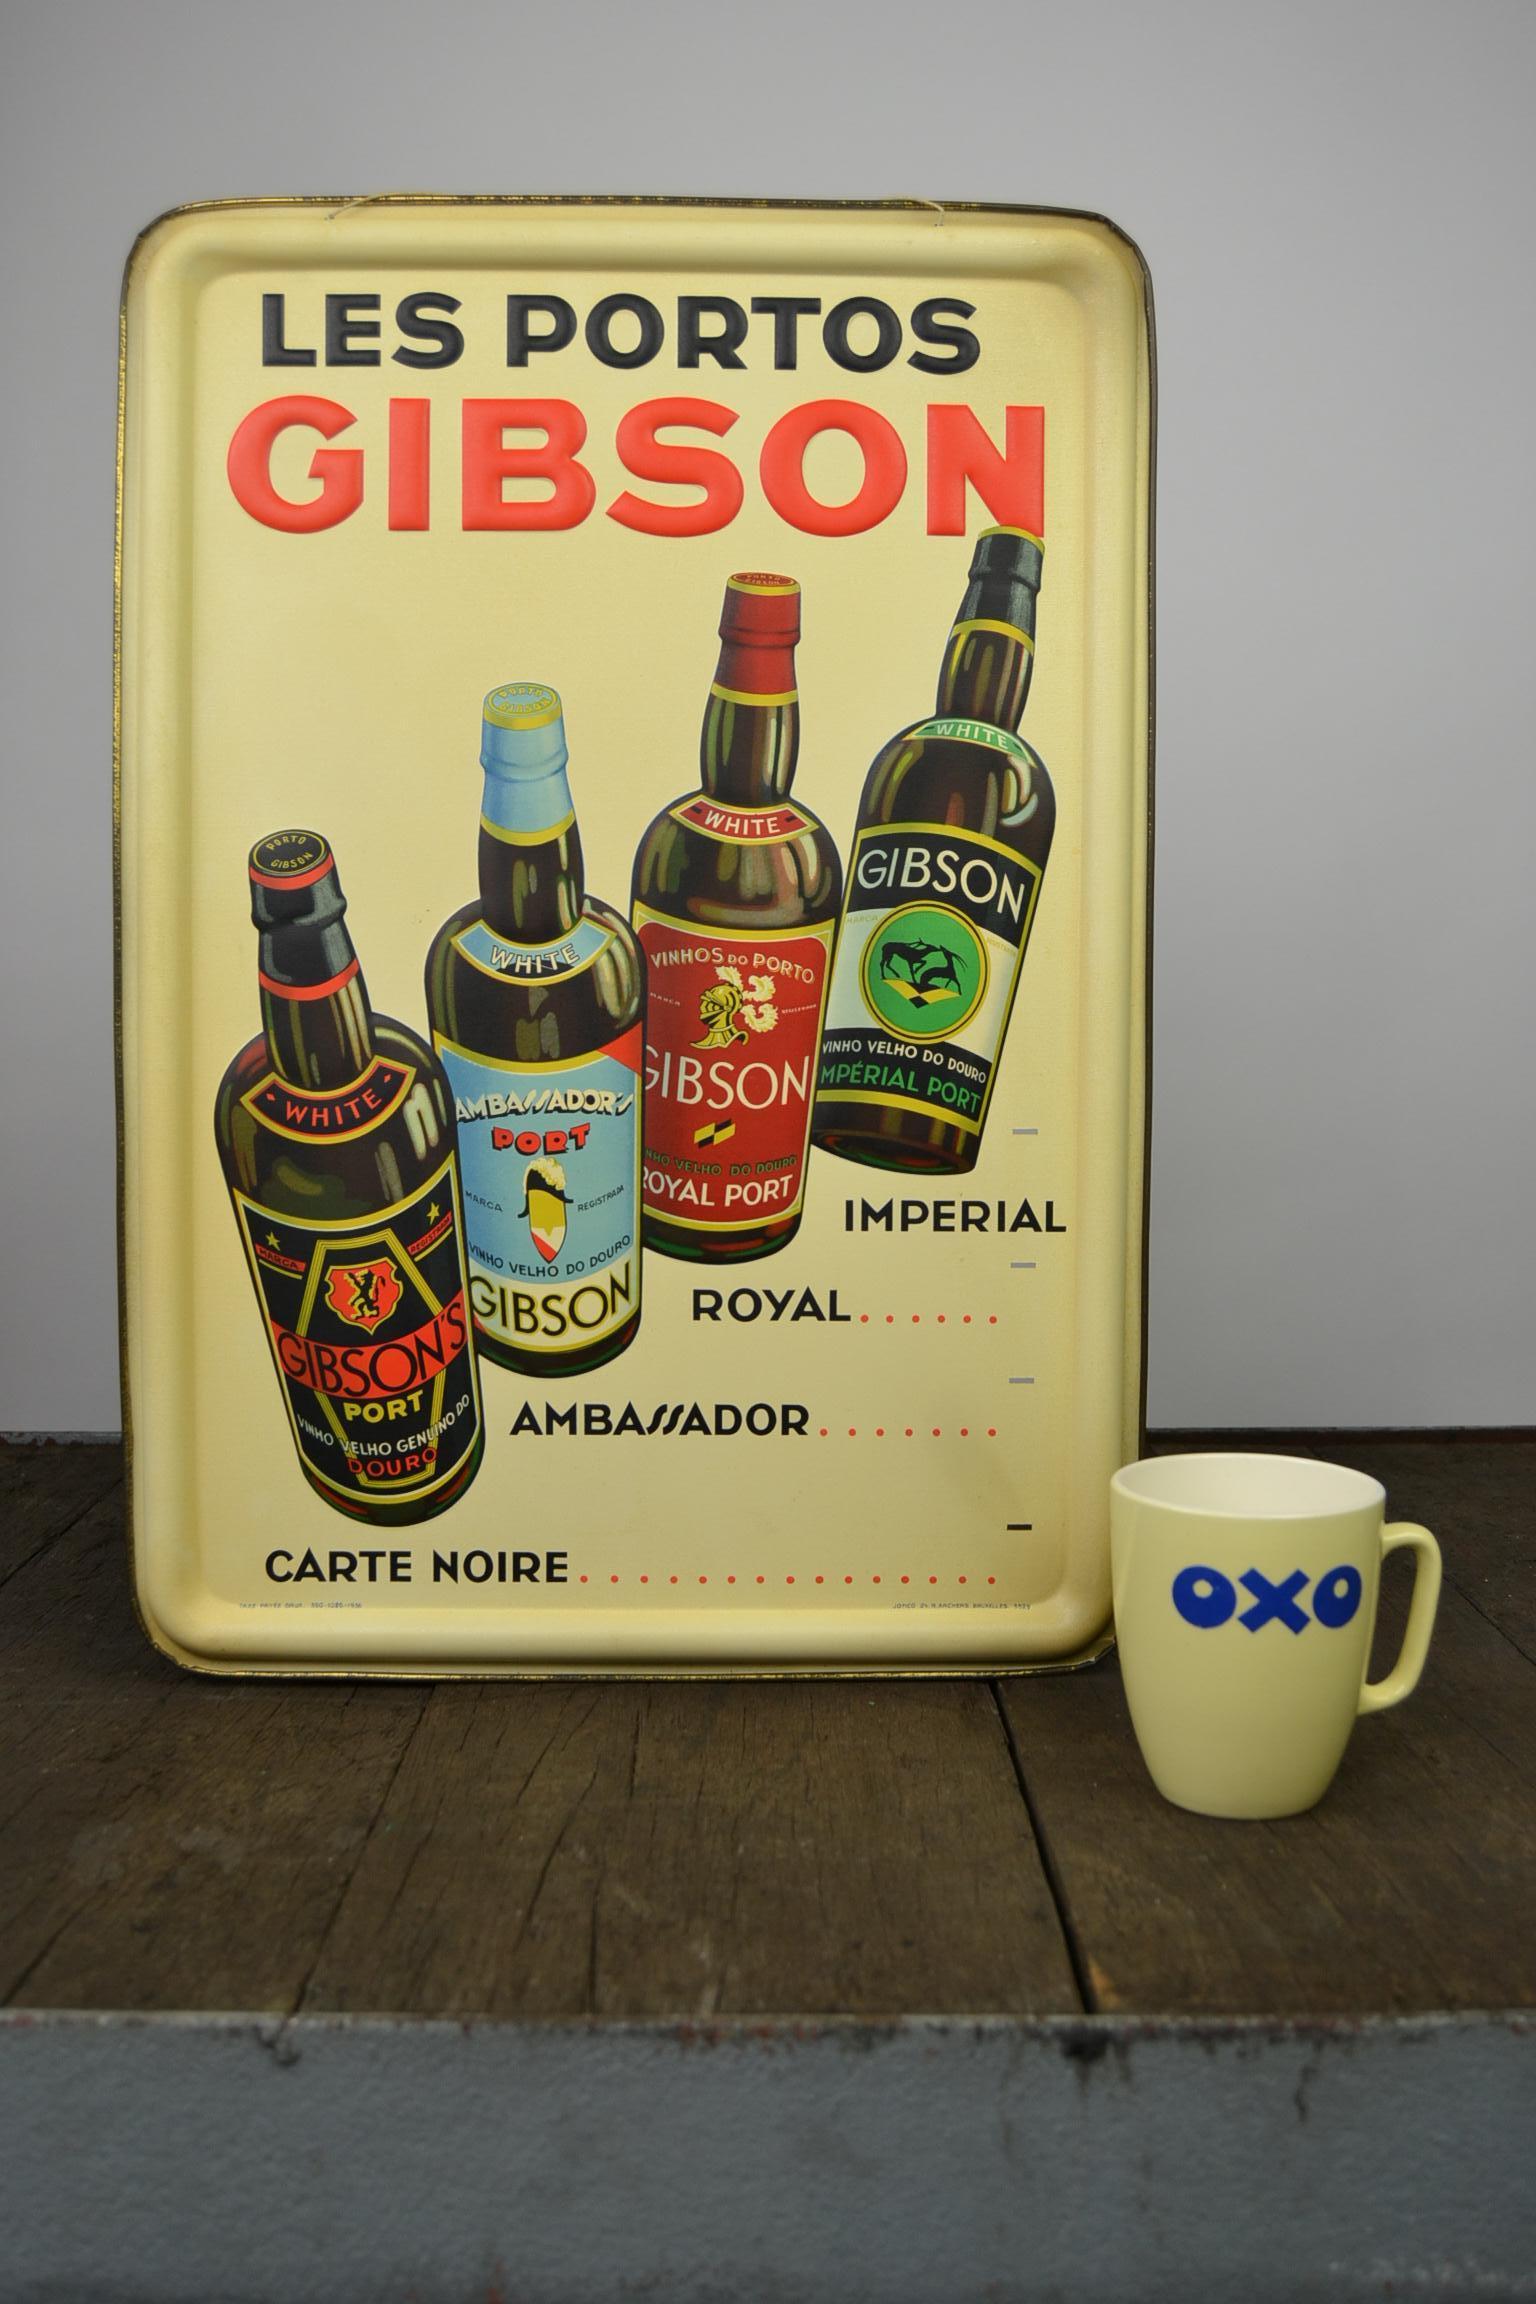 1936 Tin Sign for Les Portos Gibson, Appetizer Drink 11